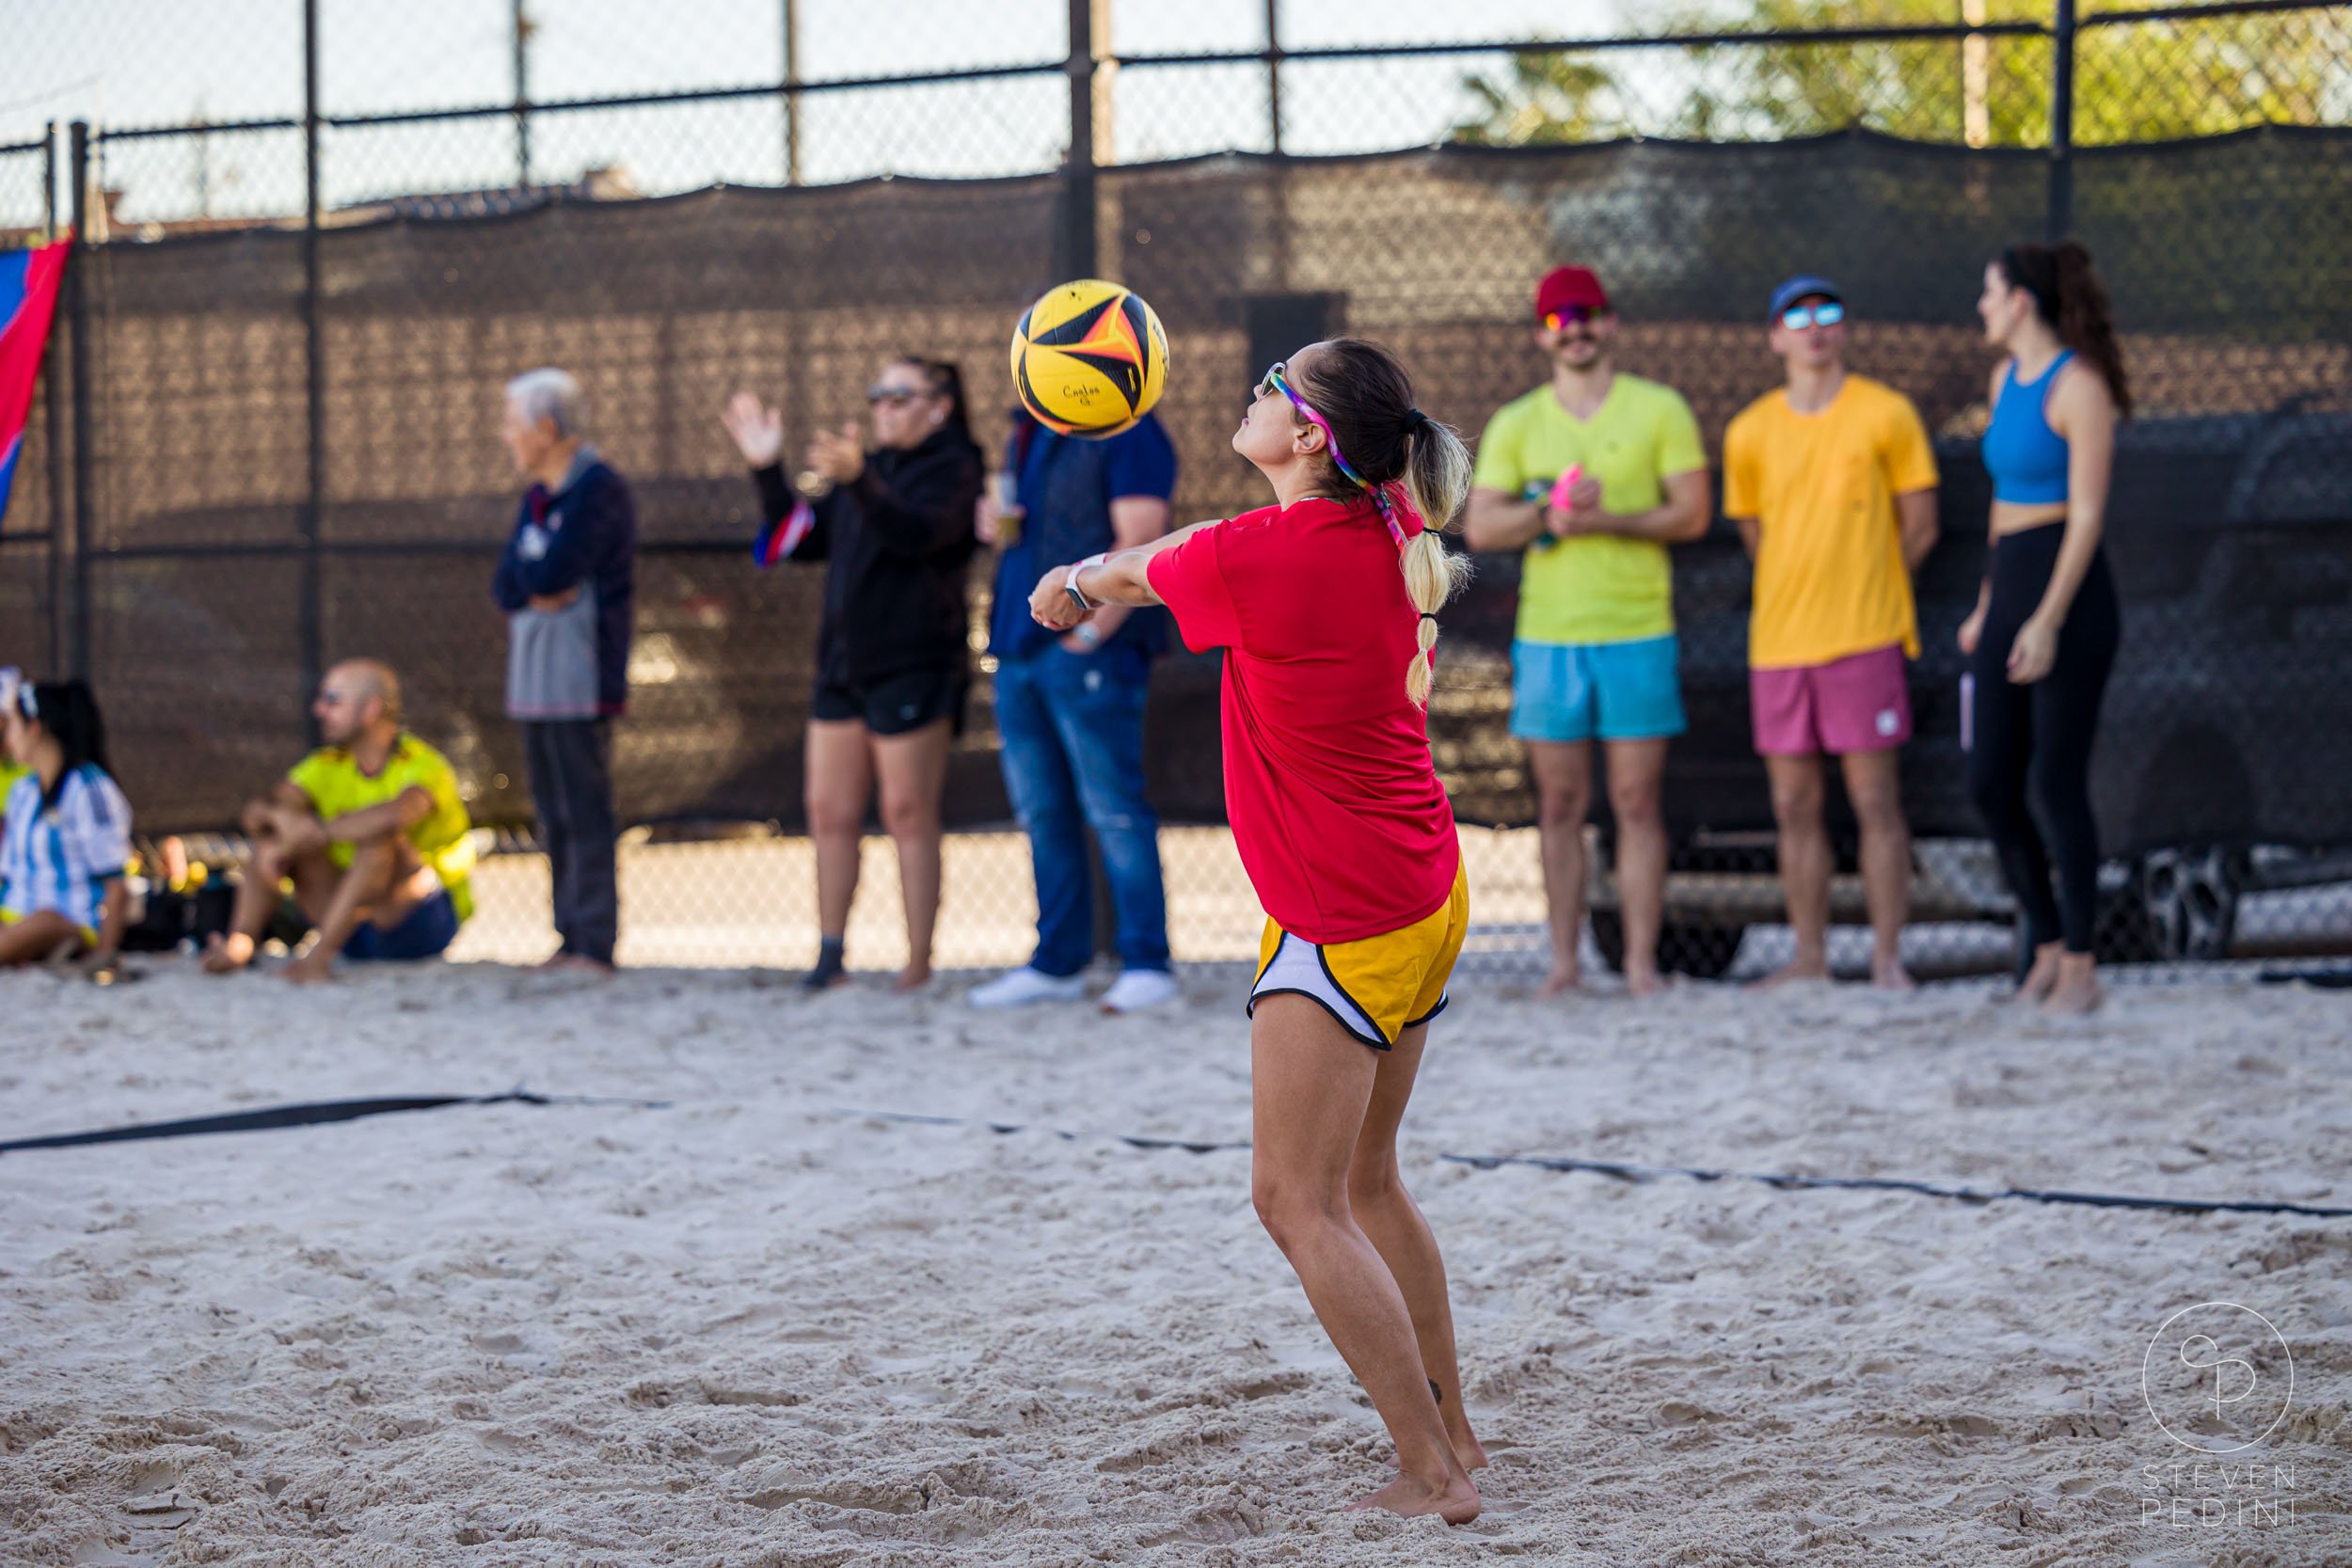 Steven Pedini Photography - Bumpy Pickle - Sand Volleyball - Houston TX - World Cup of Volleyball - 00112.jpg